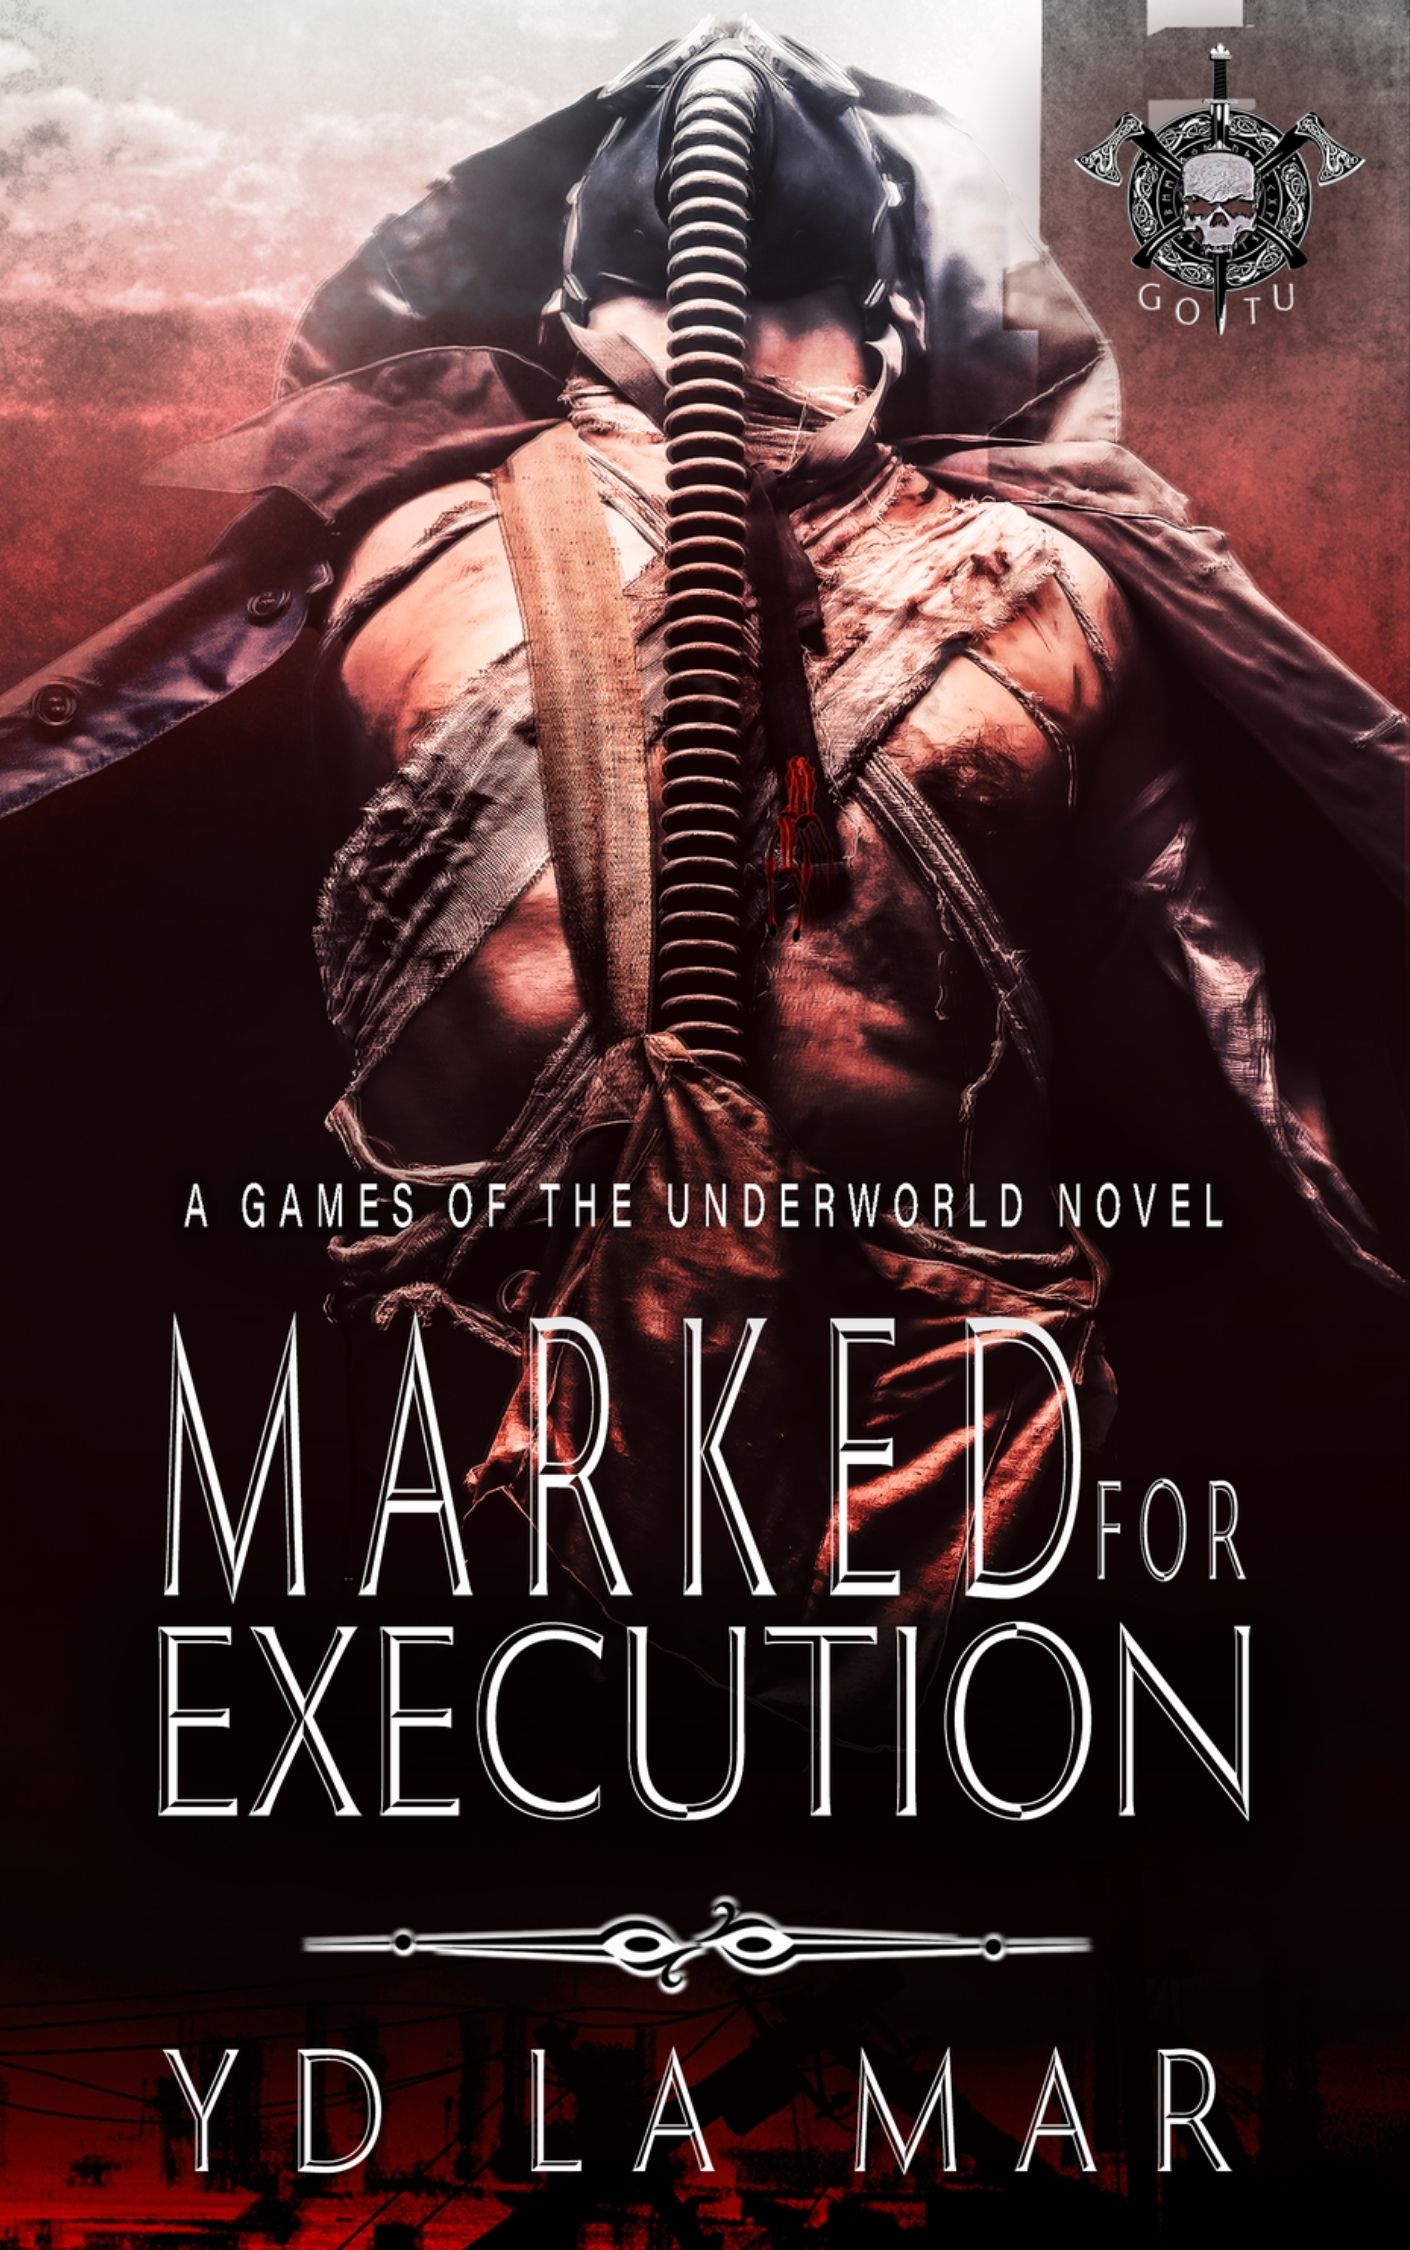 Book Cover: Marked For Execution by YD La Mar